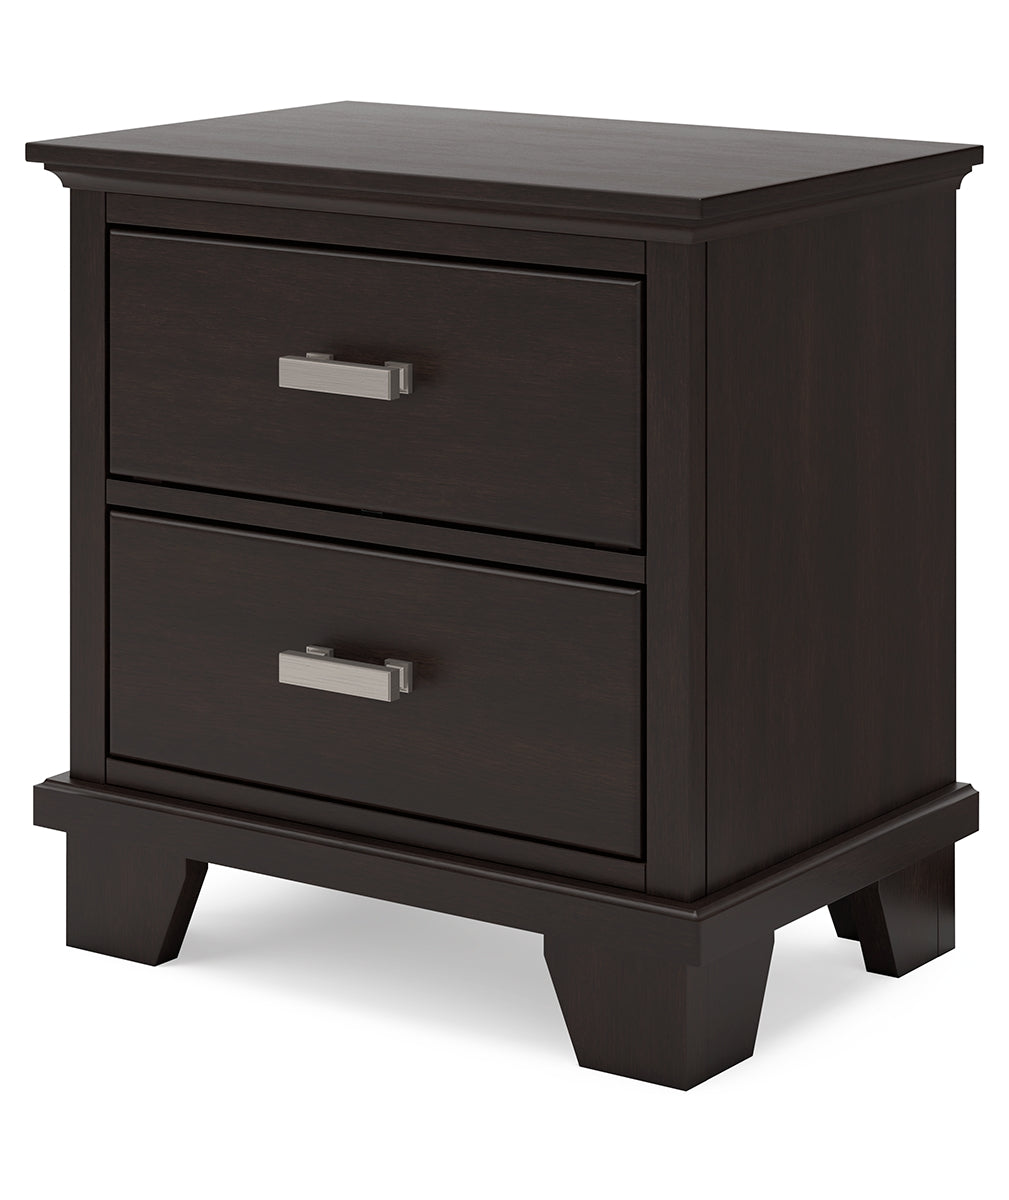 Covetown Full Panel Bed with Nightstand